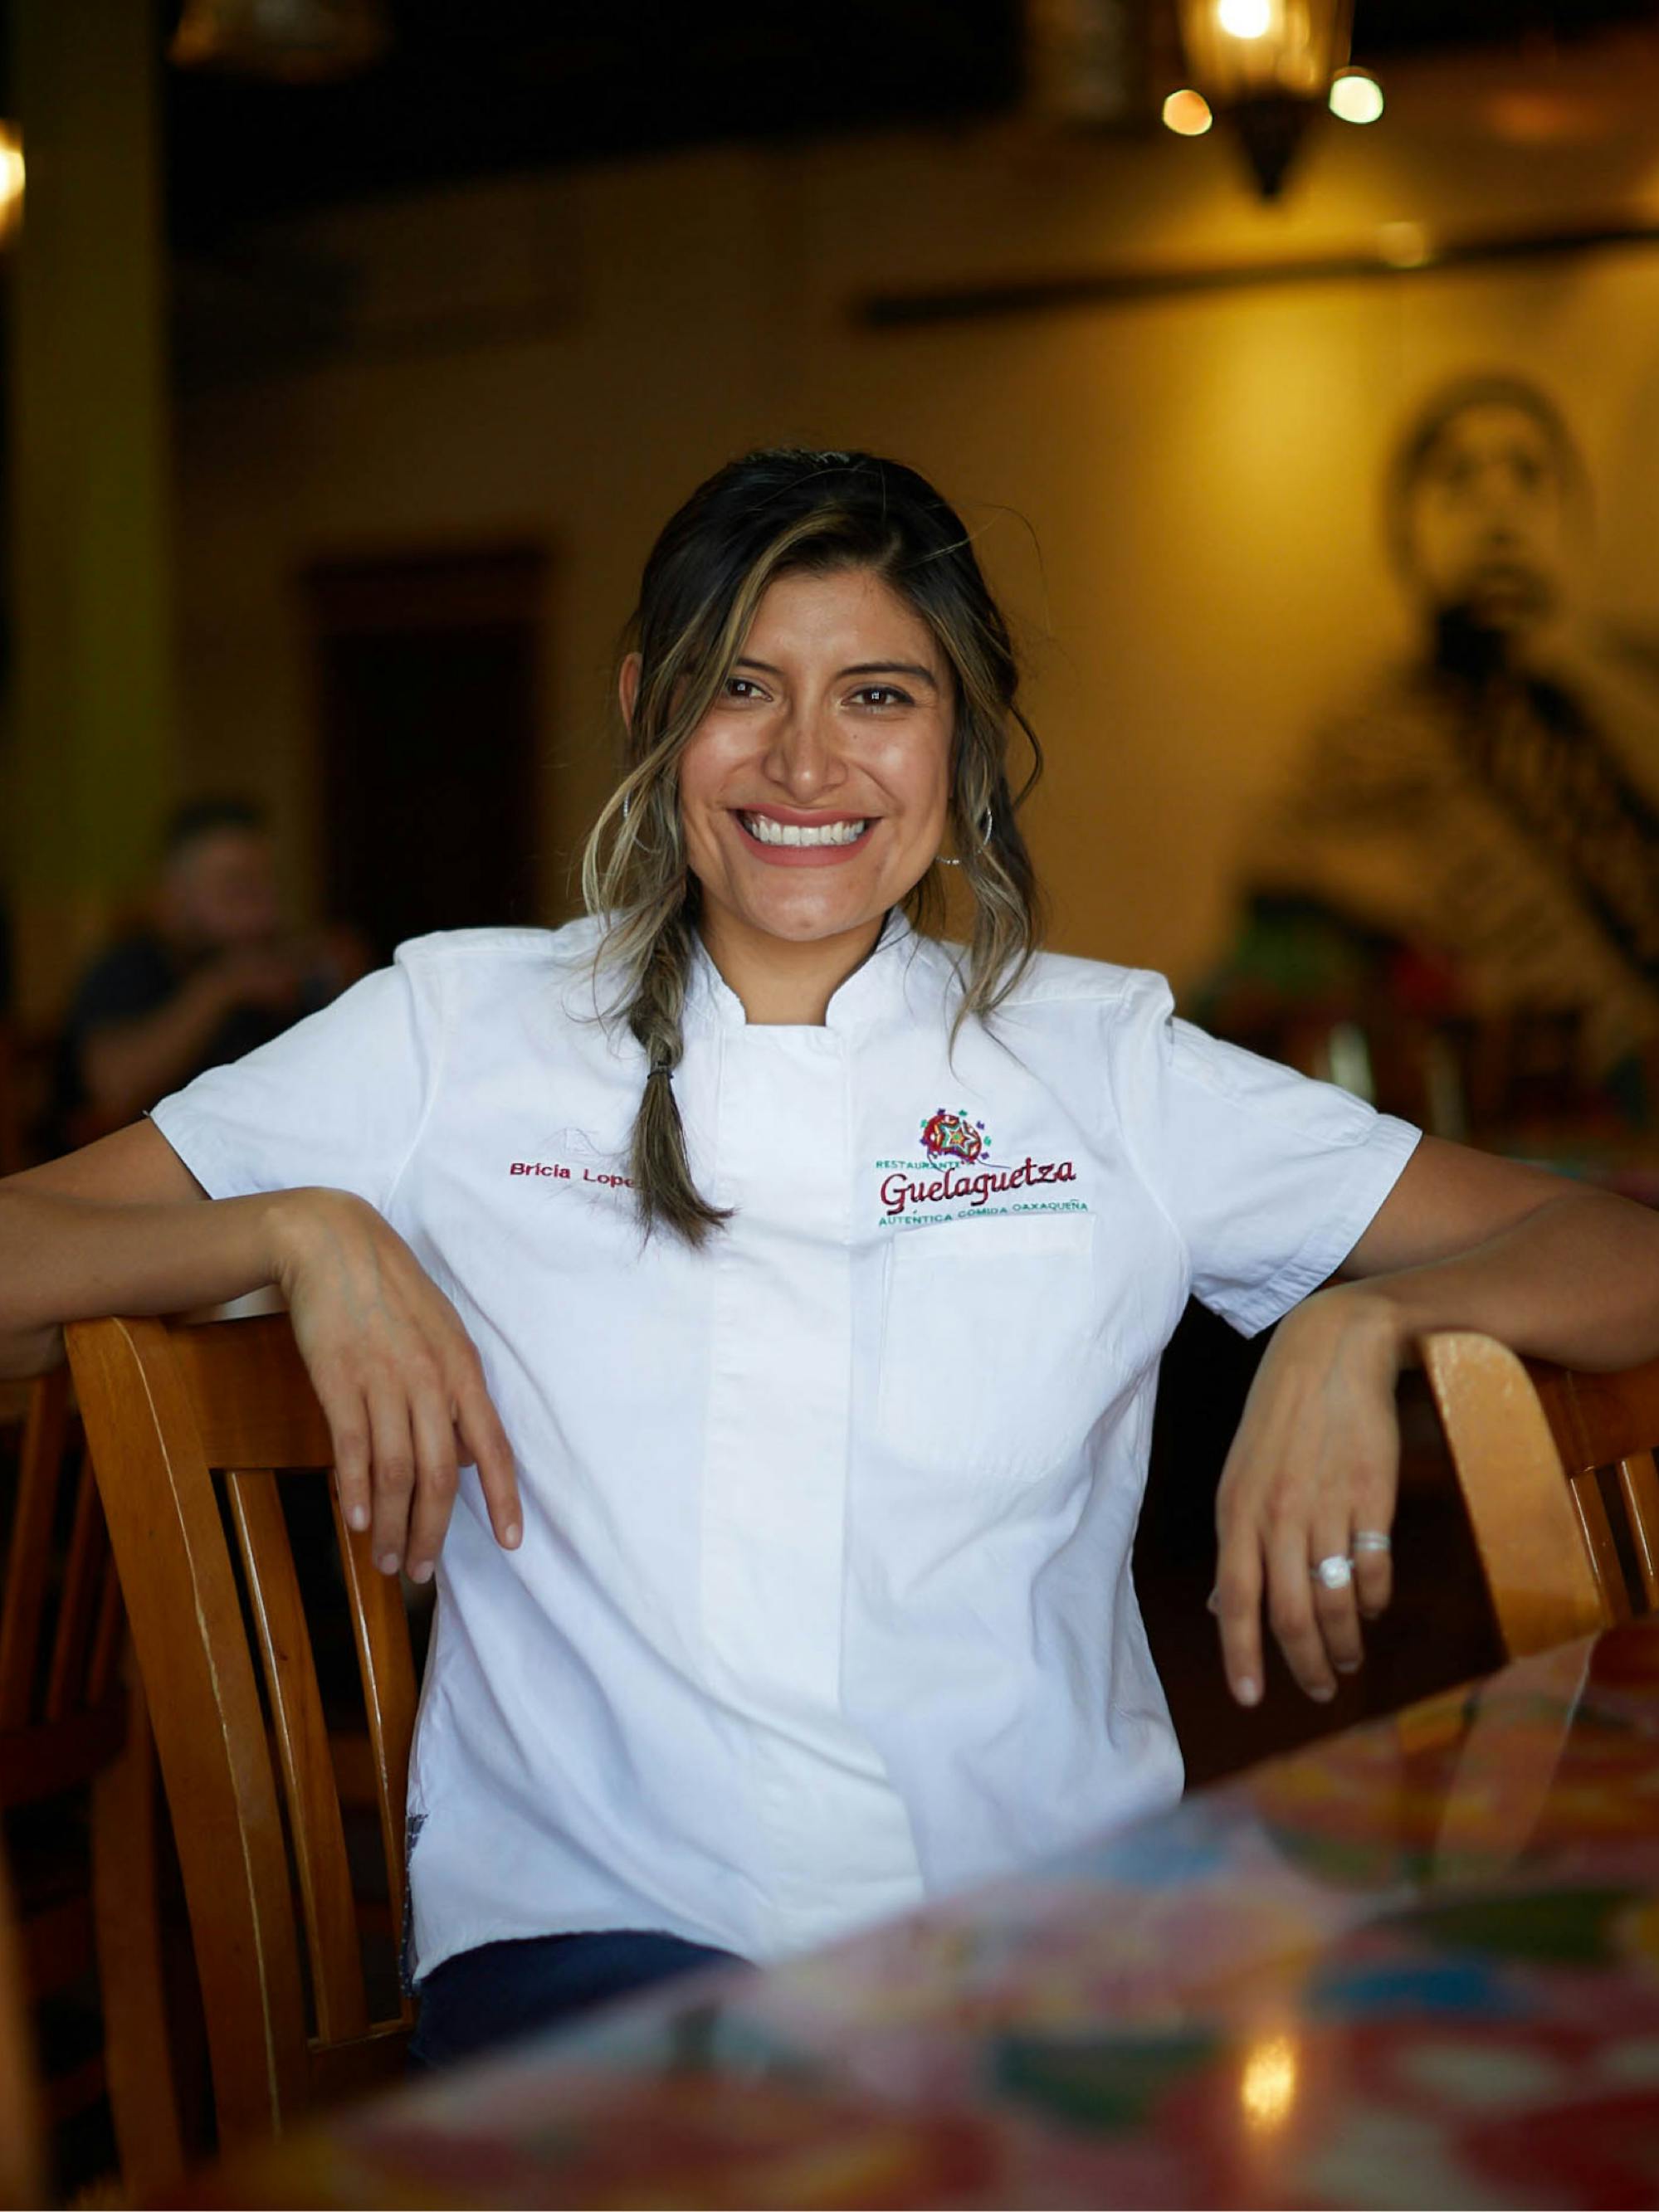 Lopez at her Los Angeles Restaurant, Guelaguetza. She’s smiling and sitting at one of the tables, with her arms propped up on two chairs. She wears a white chef’s shirt with the restaurant’s logo. There’s a mural on a yellow wall in the background.